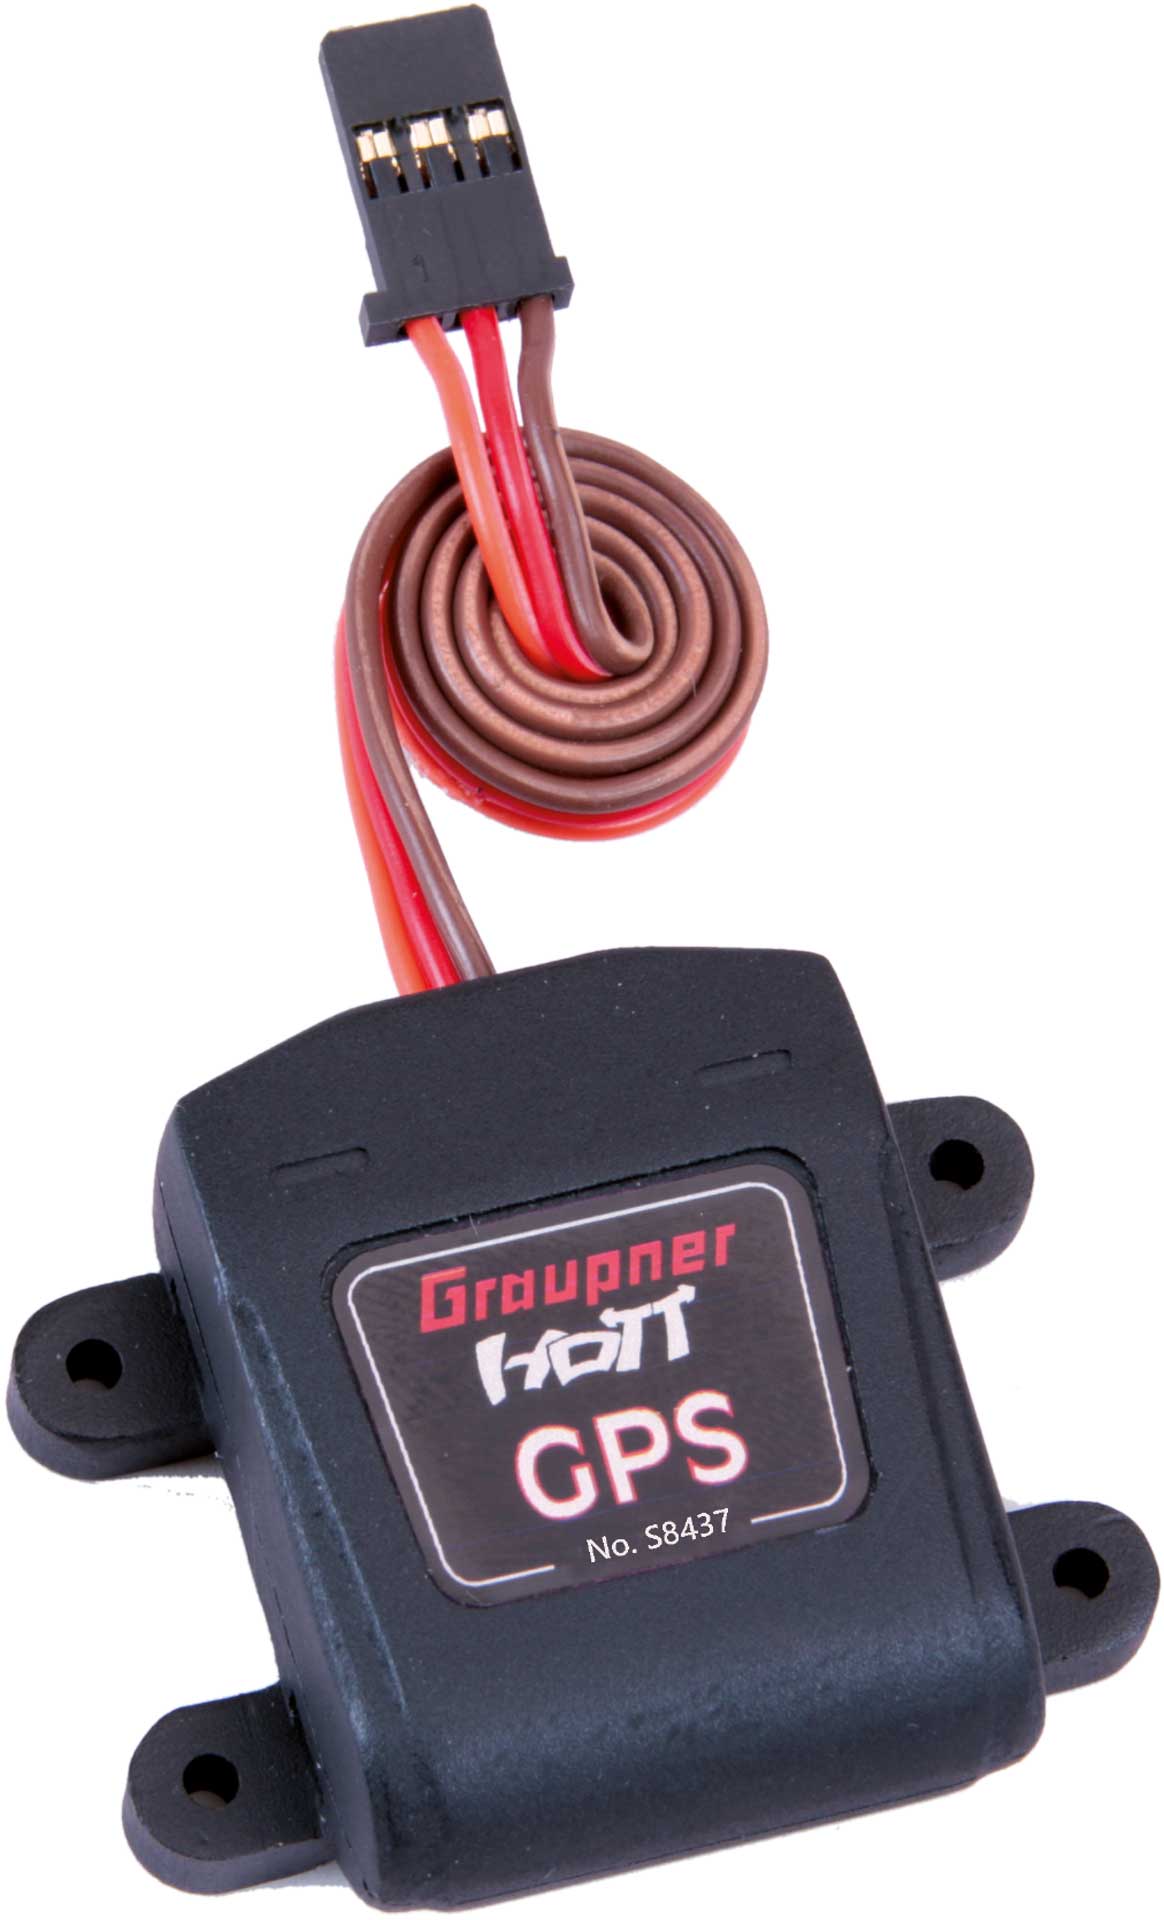 GRAUPNER GPS/VARIO MODULE ALPHA HOT NEW WITH ROUND TIME MEASUREMENT